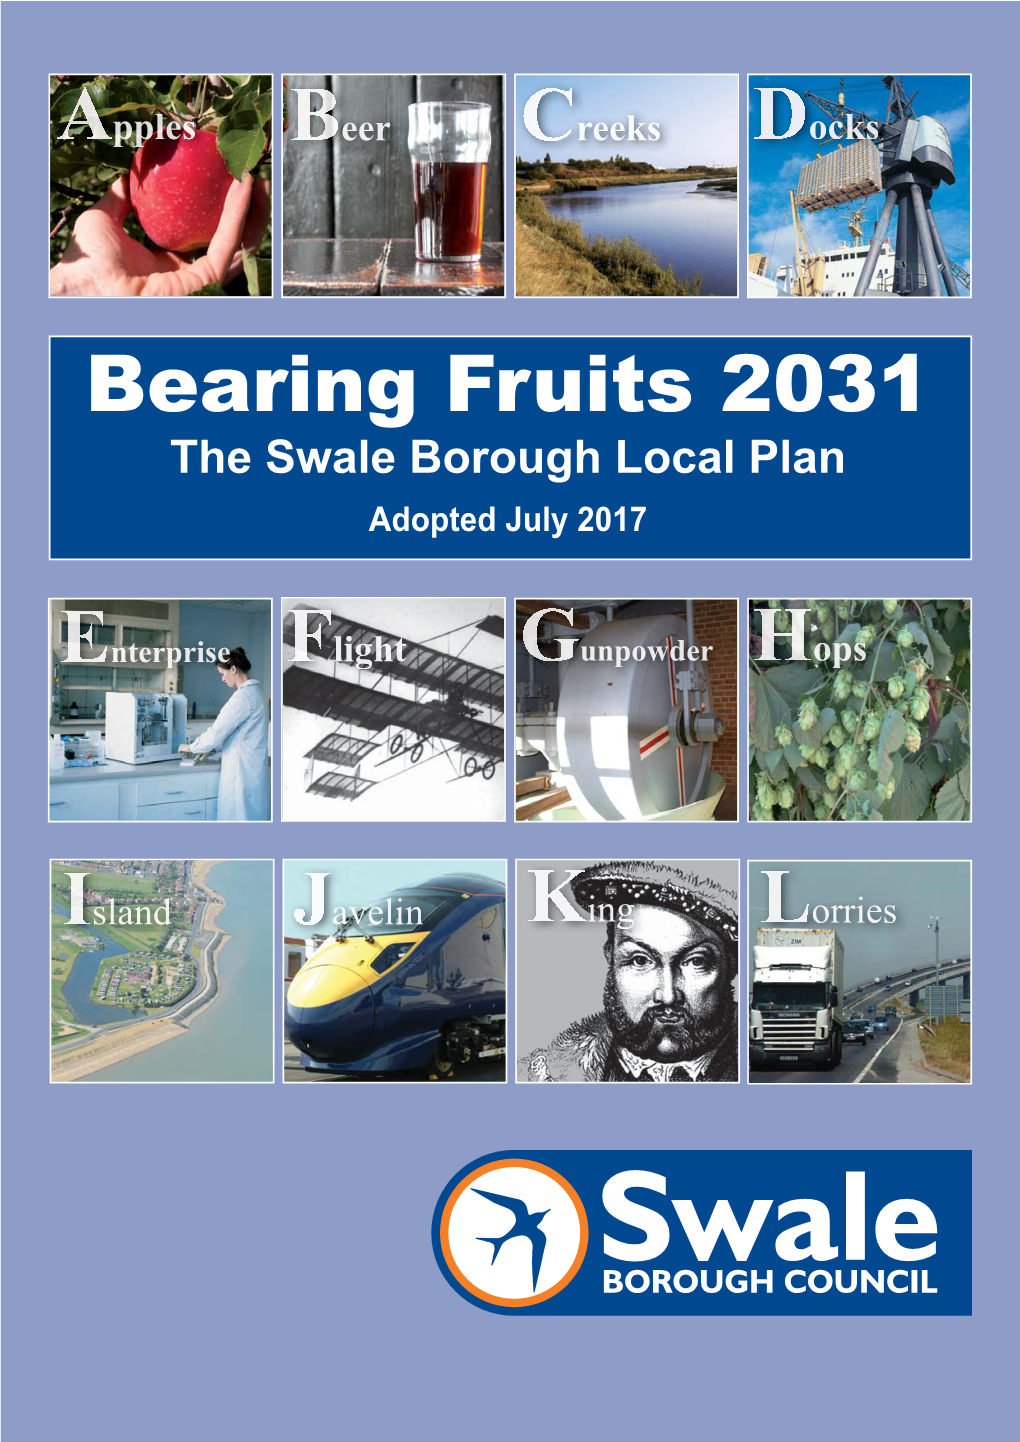 The Swale Borough Local Plan 2017